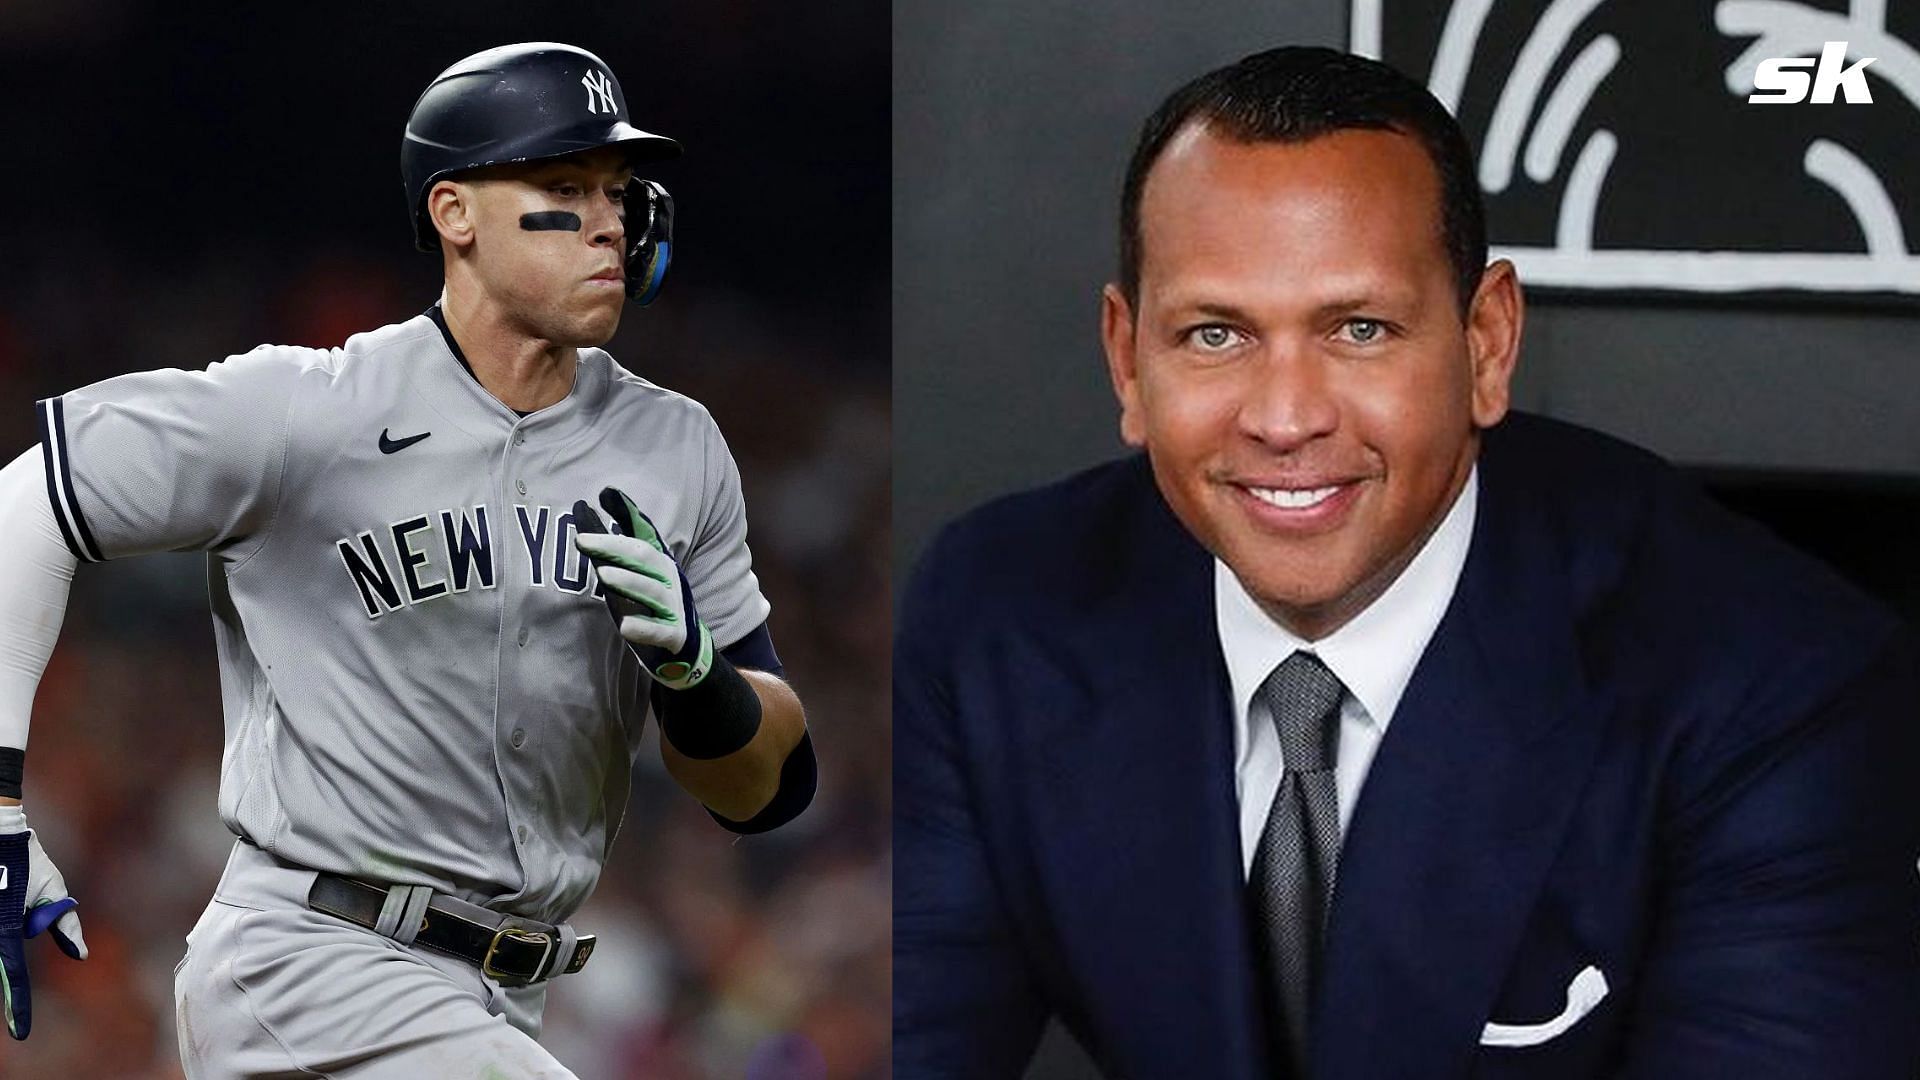 New York Yankees legend Alex Rodriguez excited for London MLB game